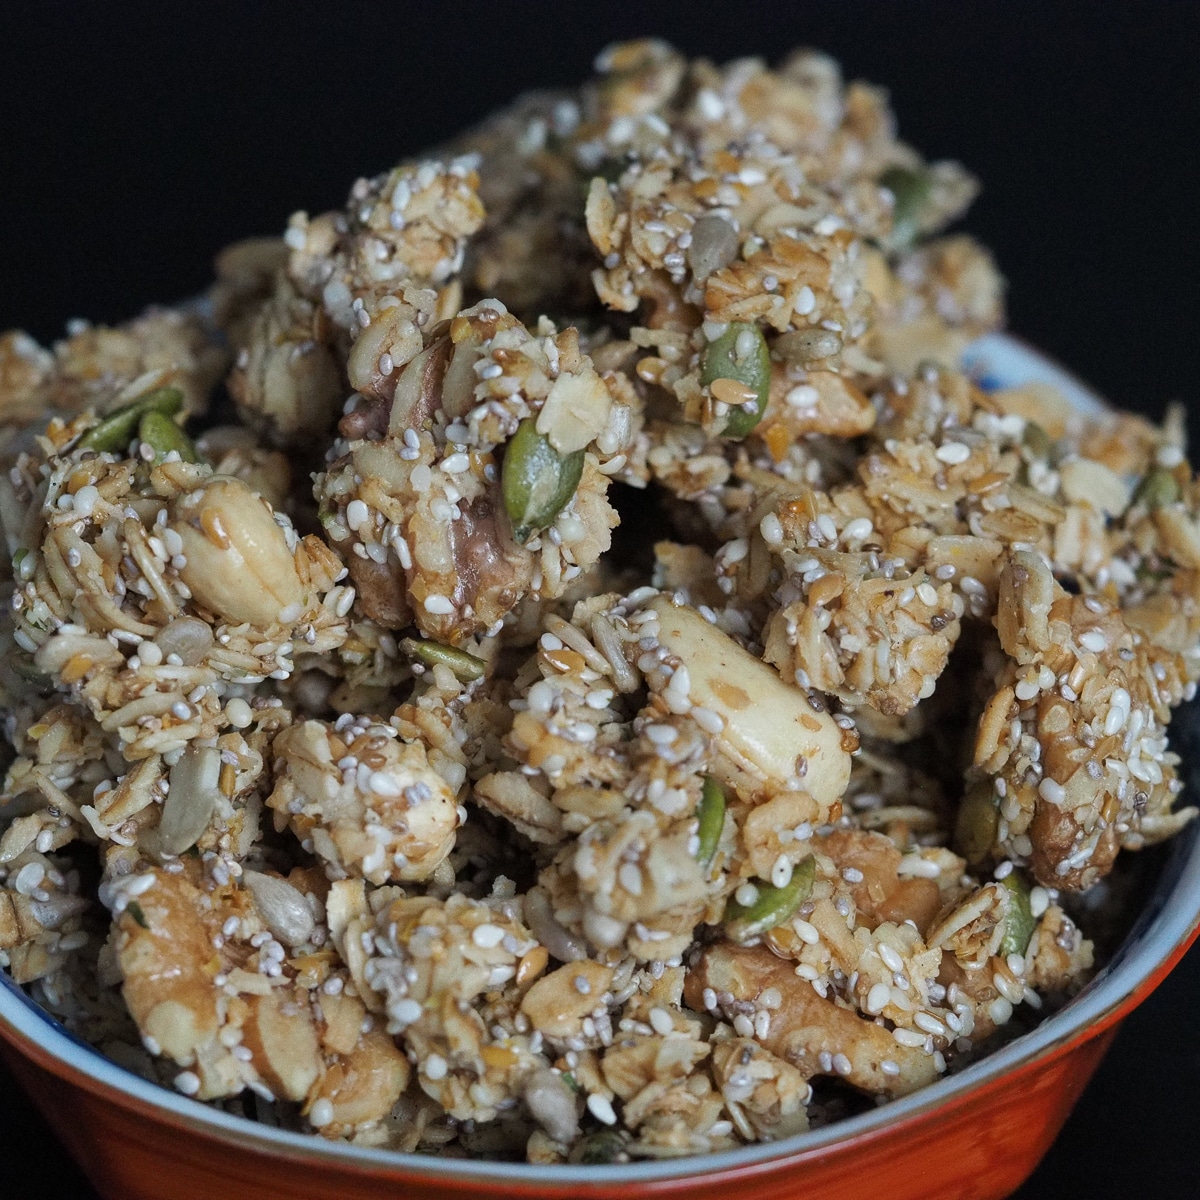 How to make clusters of healthy granola